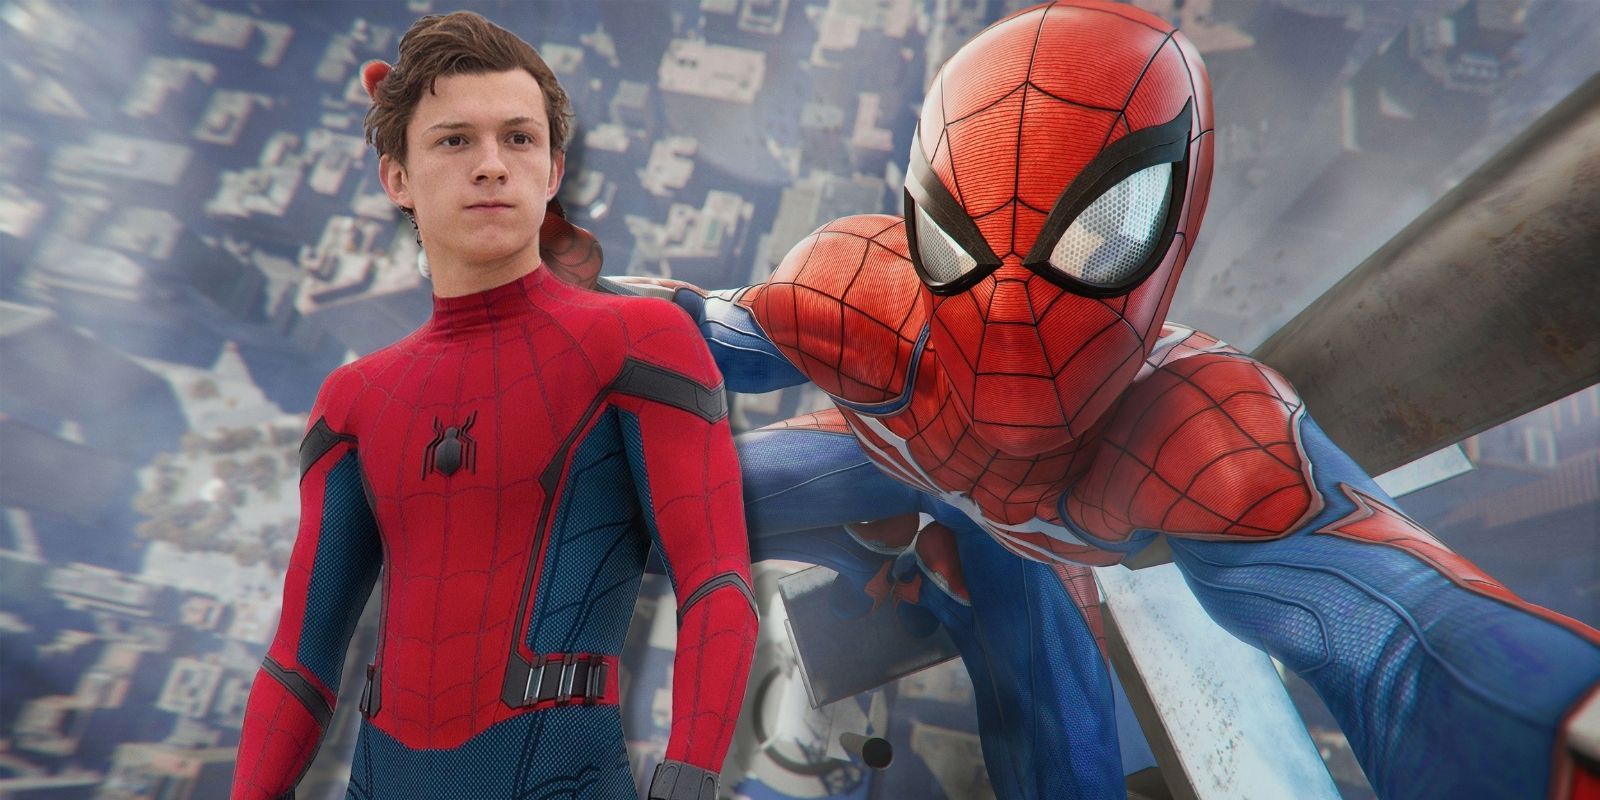 Tom Holland's Peter Parker next to Spider-Man from the PlayStation 4 game